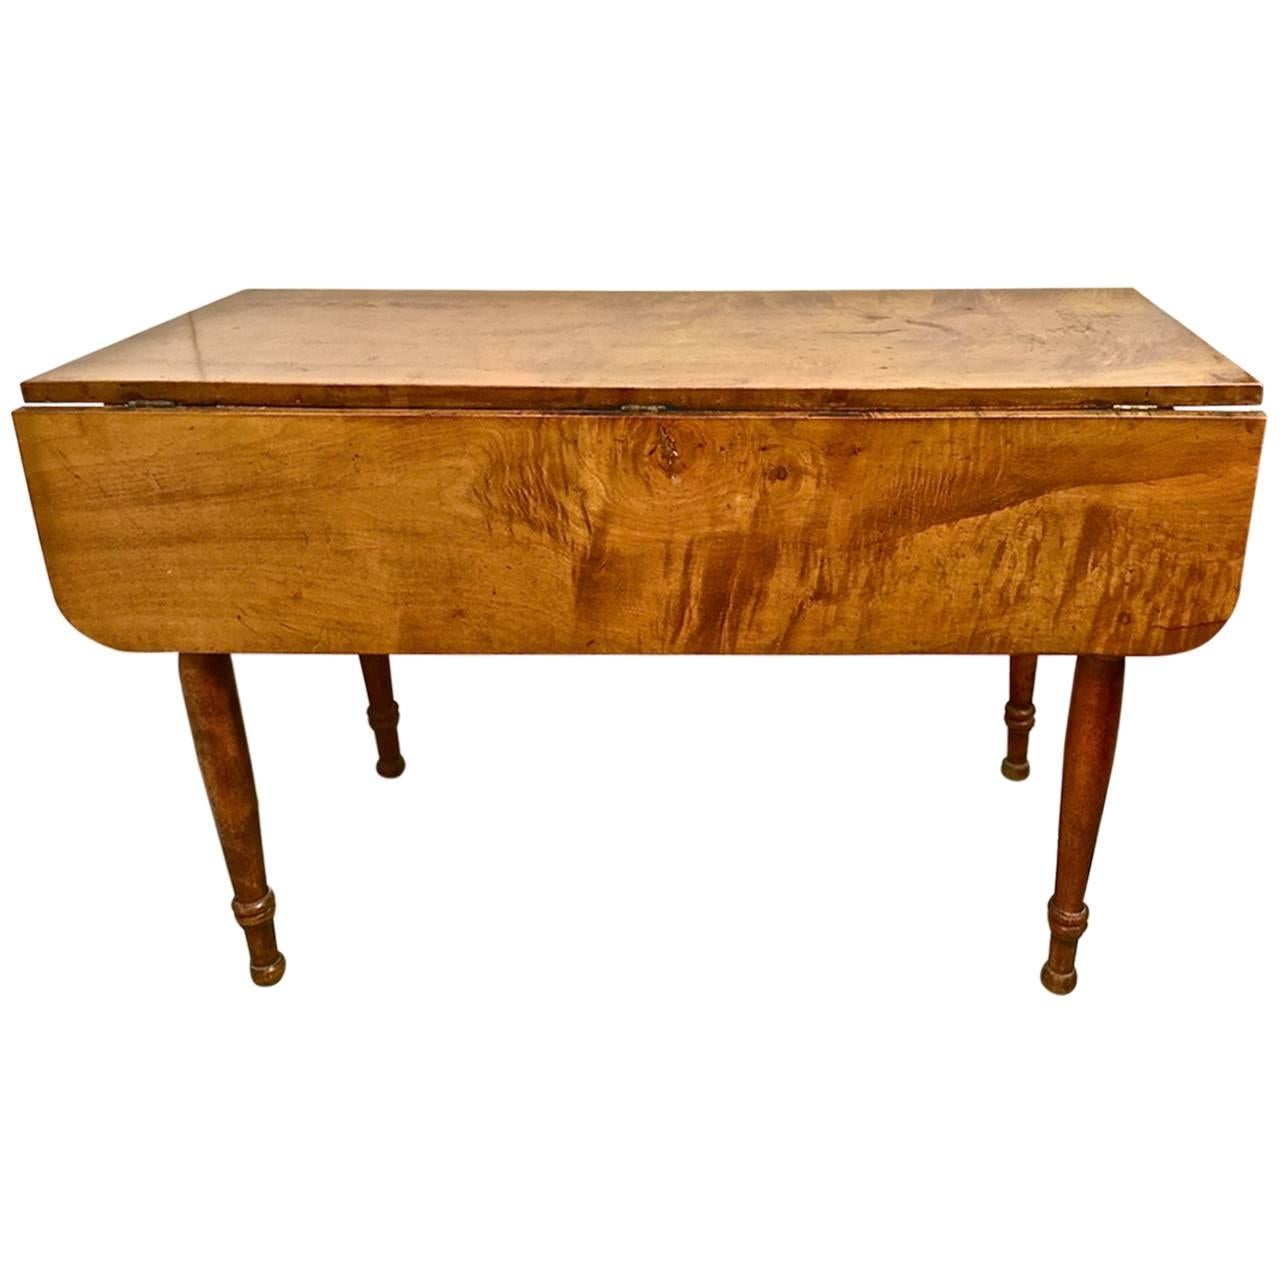 Exceptional and Rare Early Sheraton Child's Drop-Leaf Federal Table